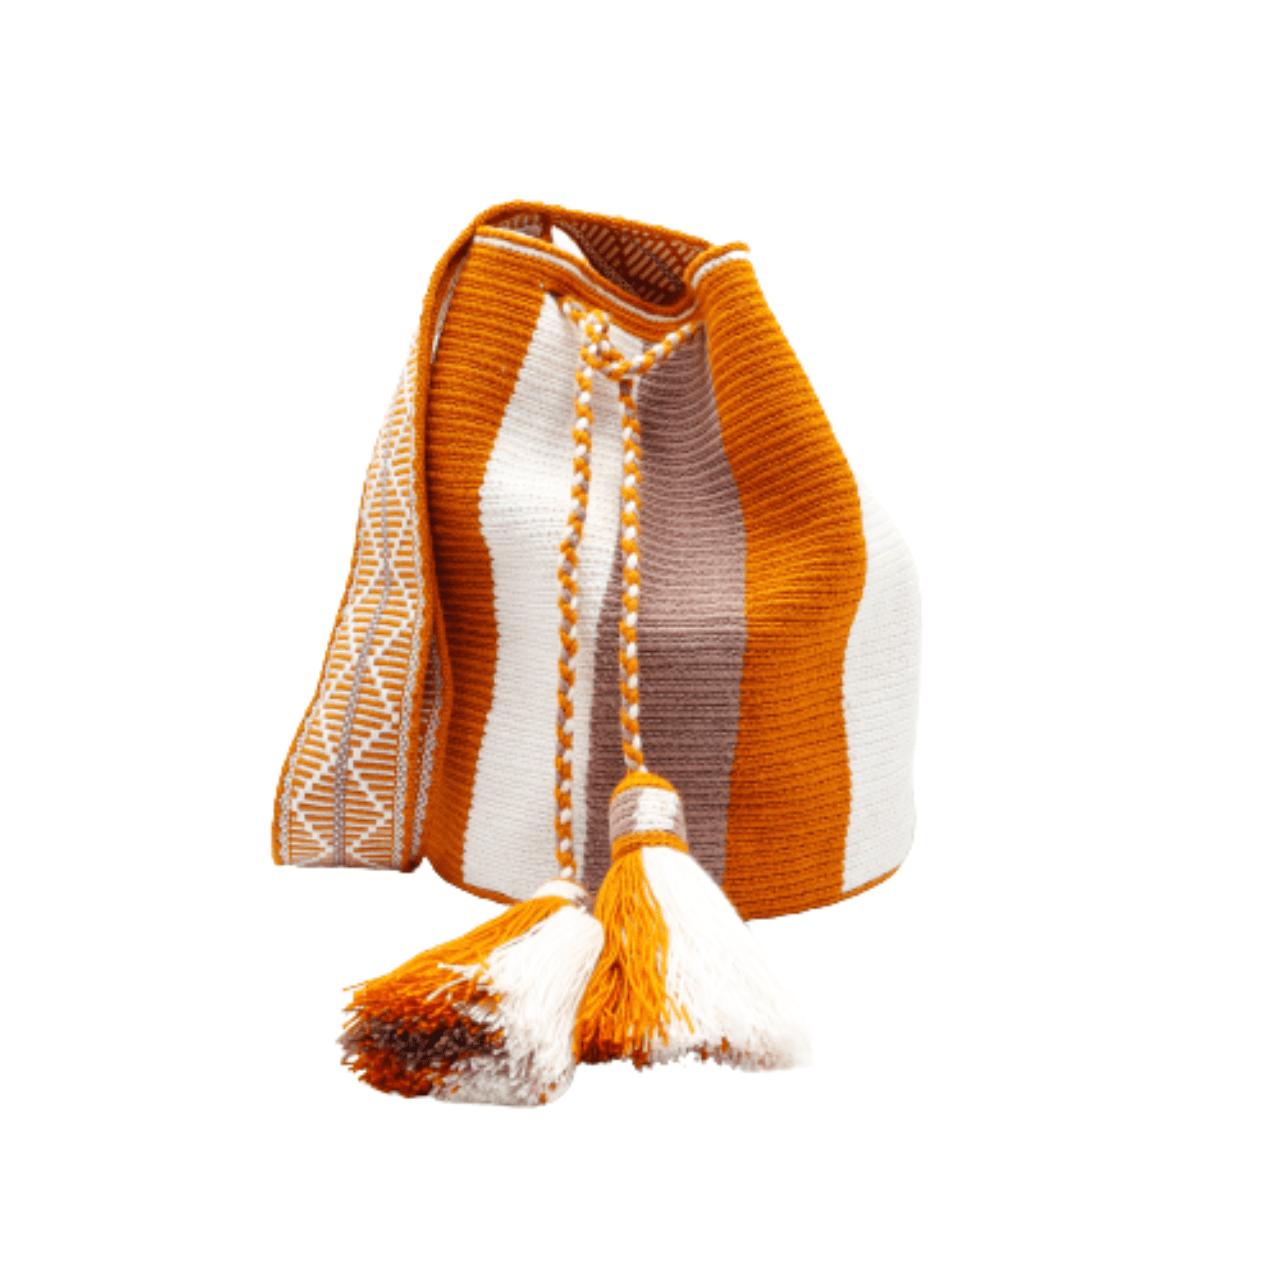 Winifred Wayuu Bag - Beige, Rust, and Taupe Colors - Wide Vertical Straps - Handcrafted Beauty and Chic Style